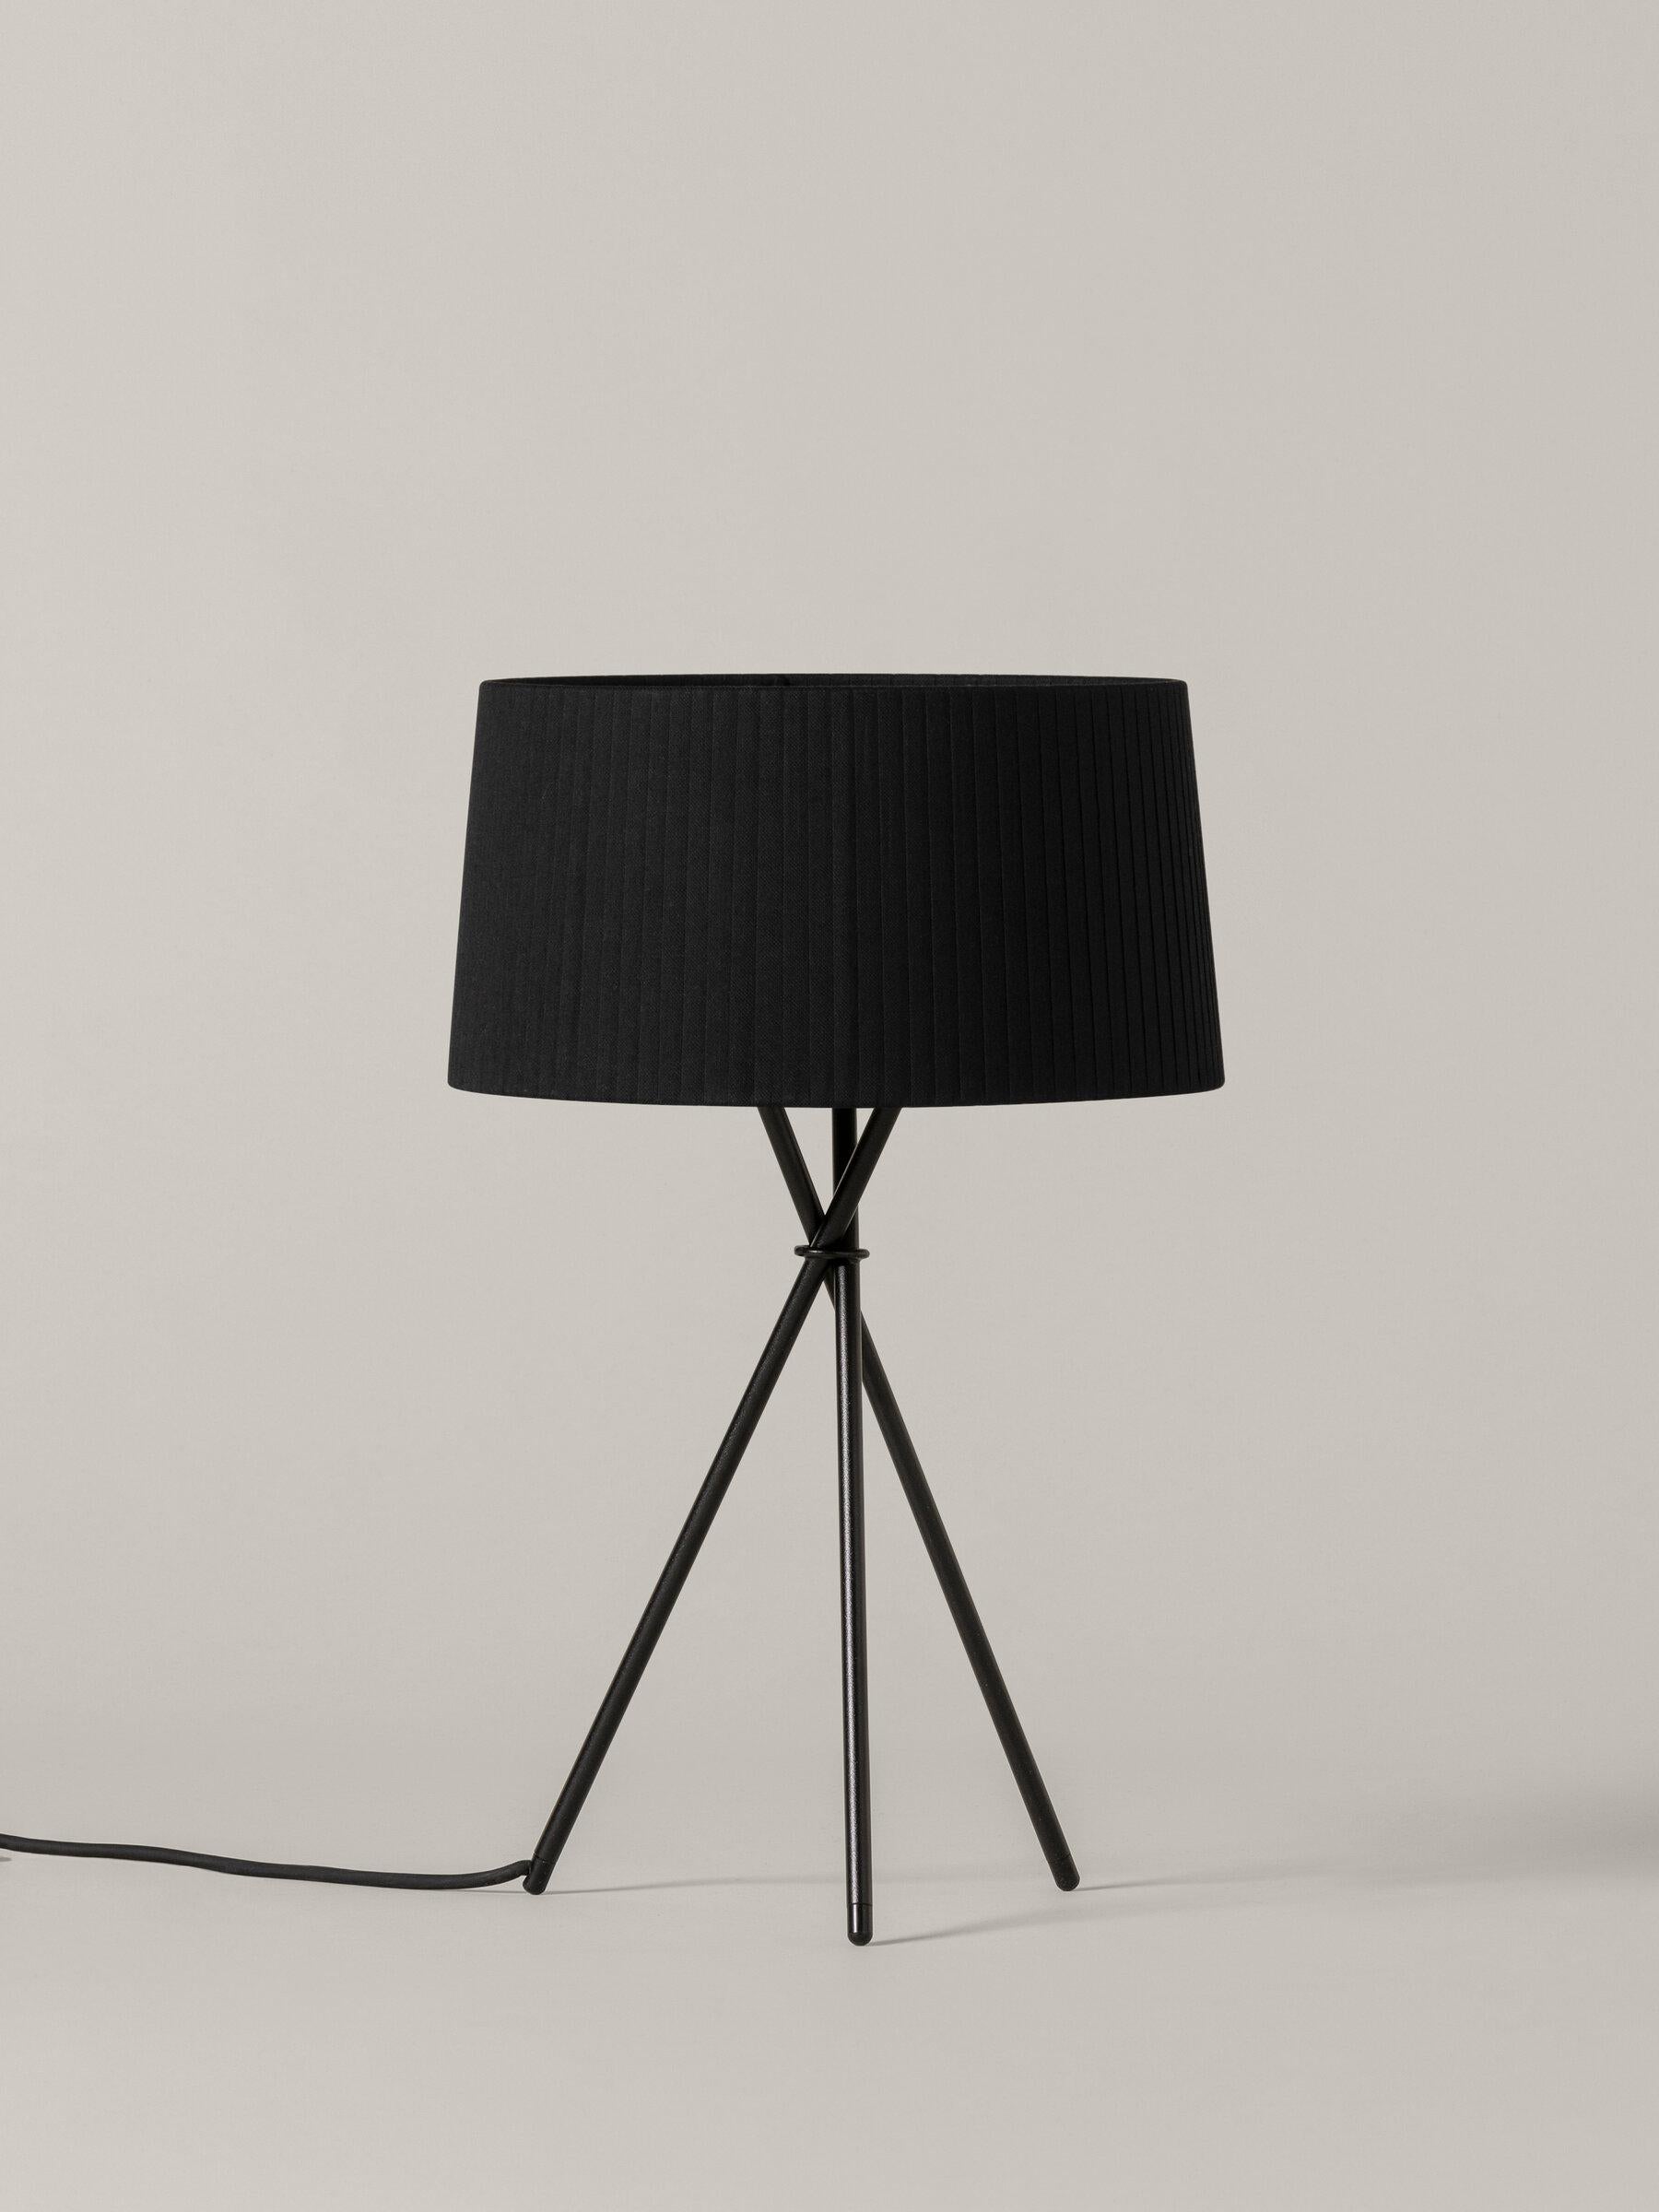 Black Trípode M3 table lamp by Santa & Cole
Dimensions: D 31 x H 50 cm
Materials: Metal, ribbon.
Available in other colors.

Trípode humanises neutral spaces with its colourful and functional sobriety. The shade is hand ribboned and its base